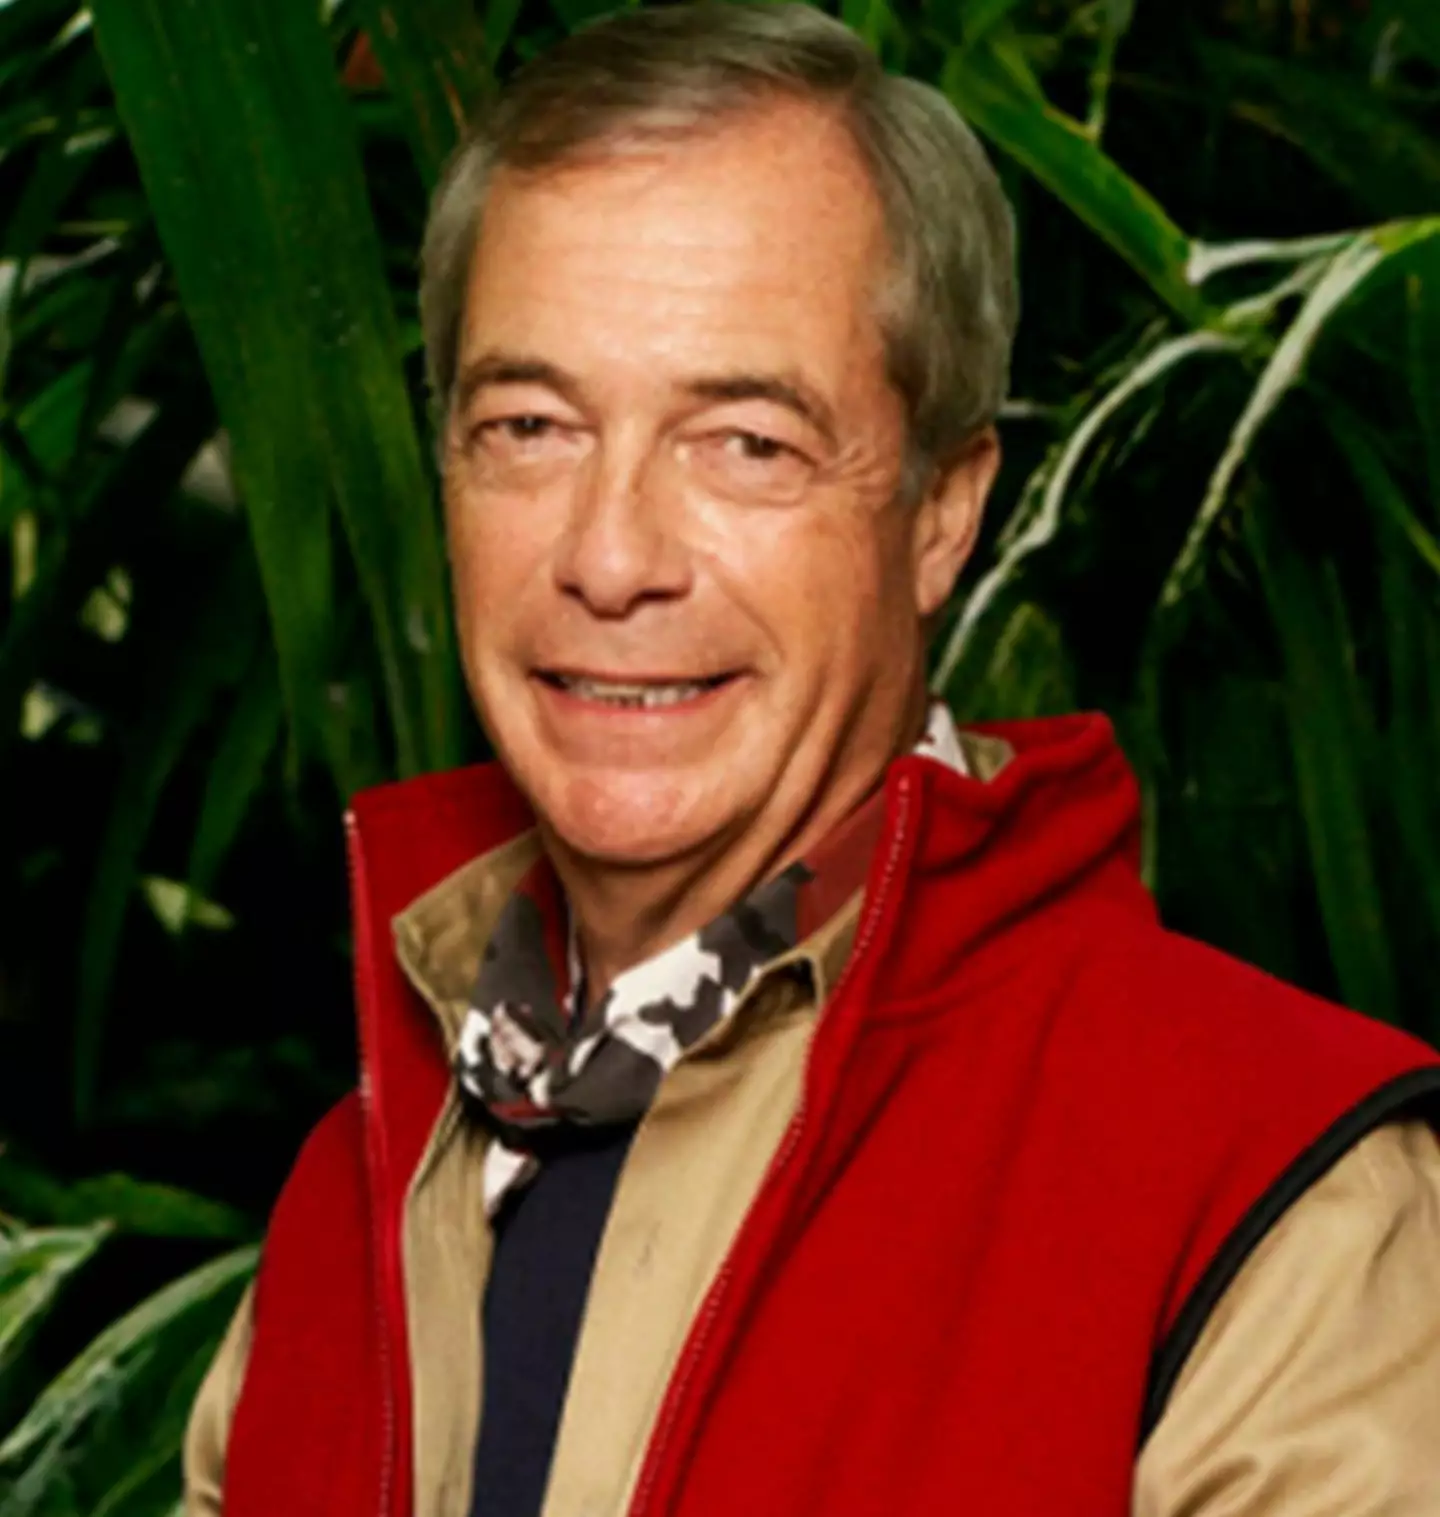 Campmate and former politician, Nigel Farage claims he's medically exempt from some of the infamous Bushtucker trials.